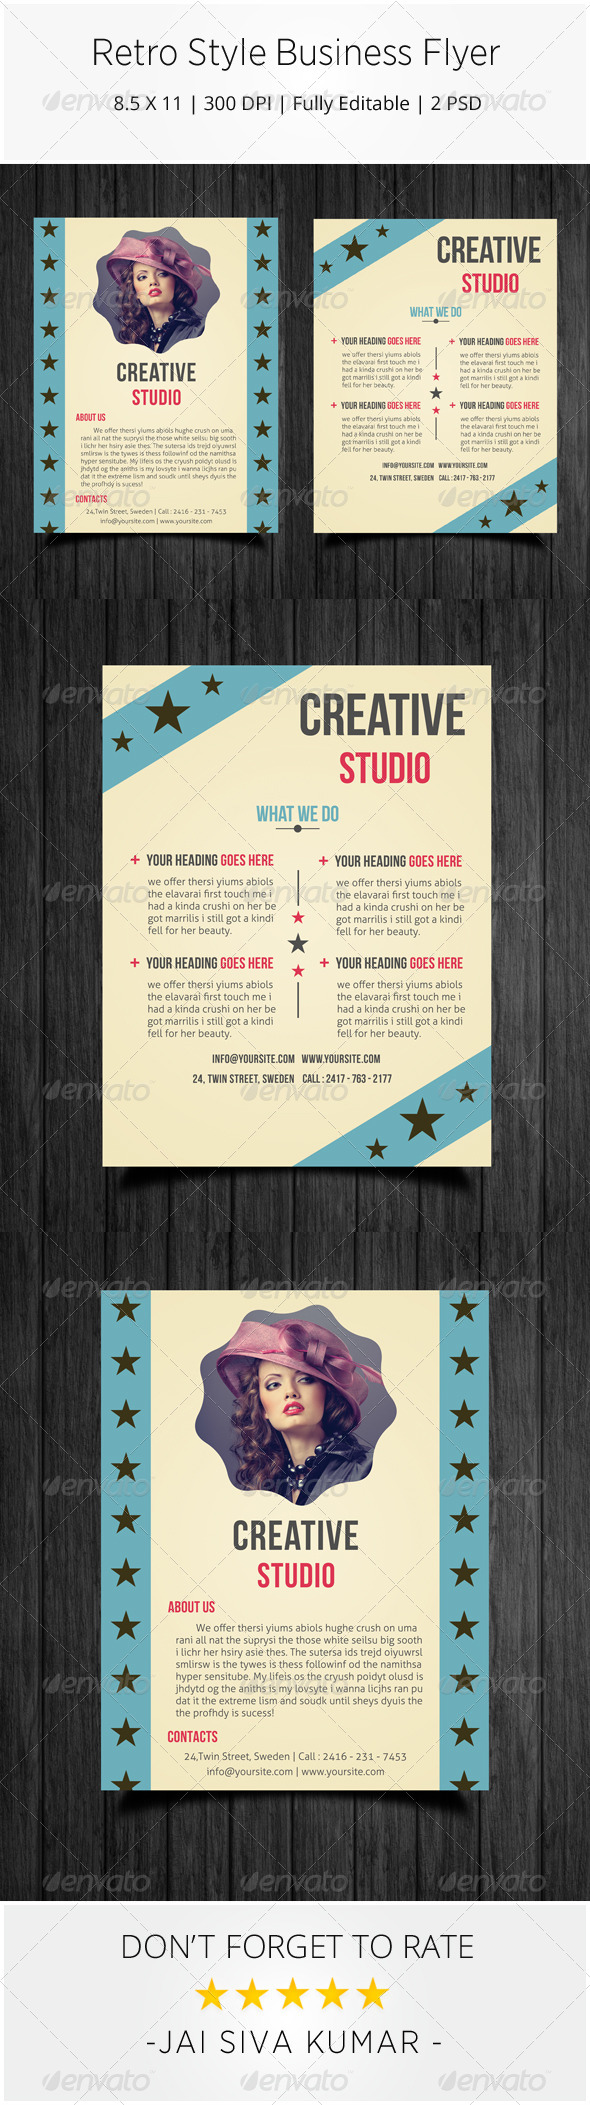 Retro Style Business Flyer